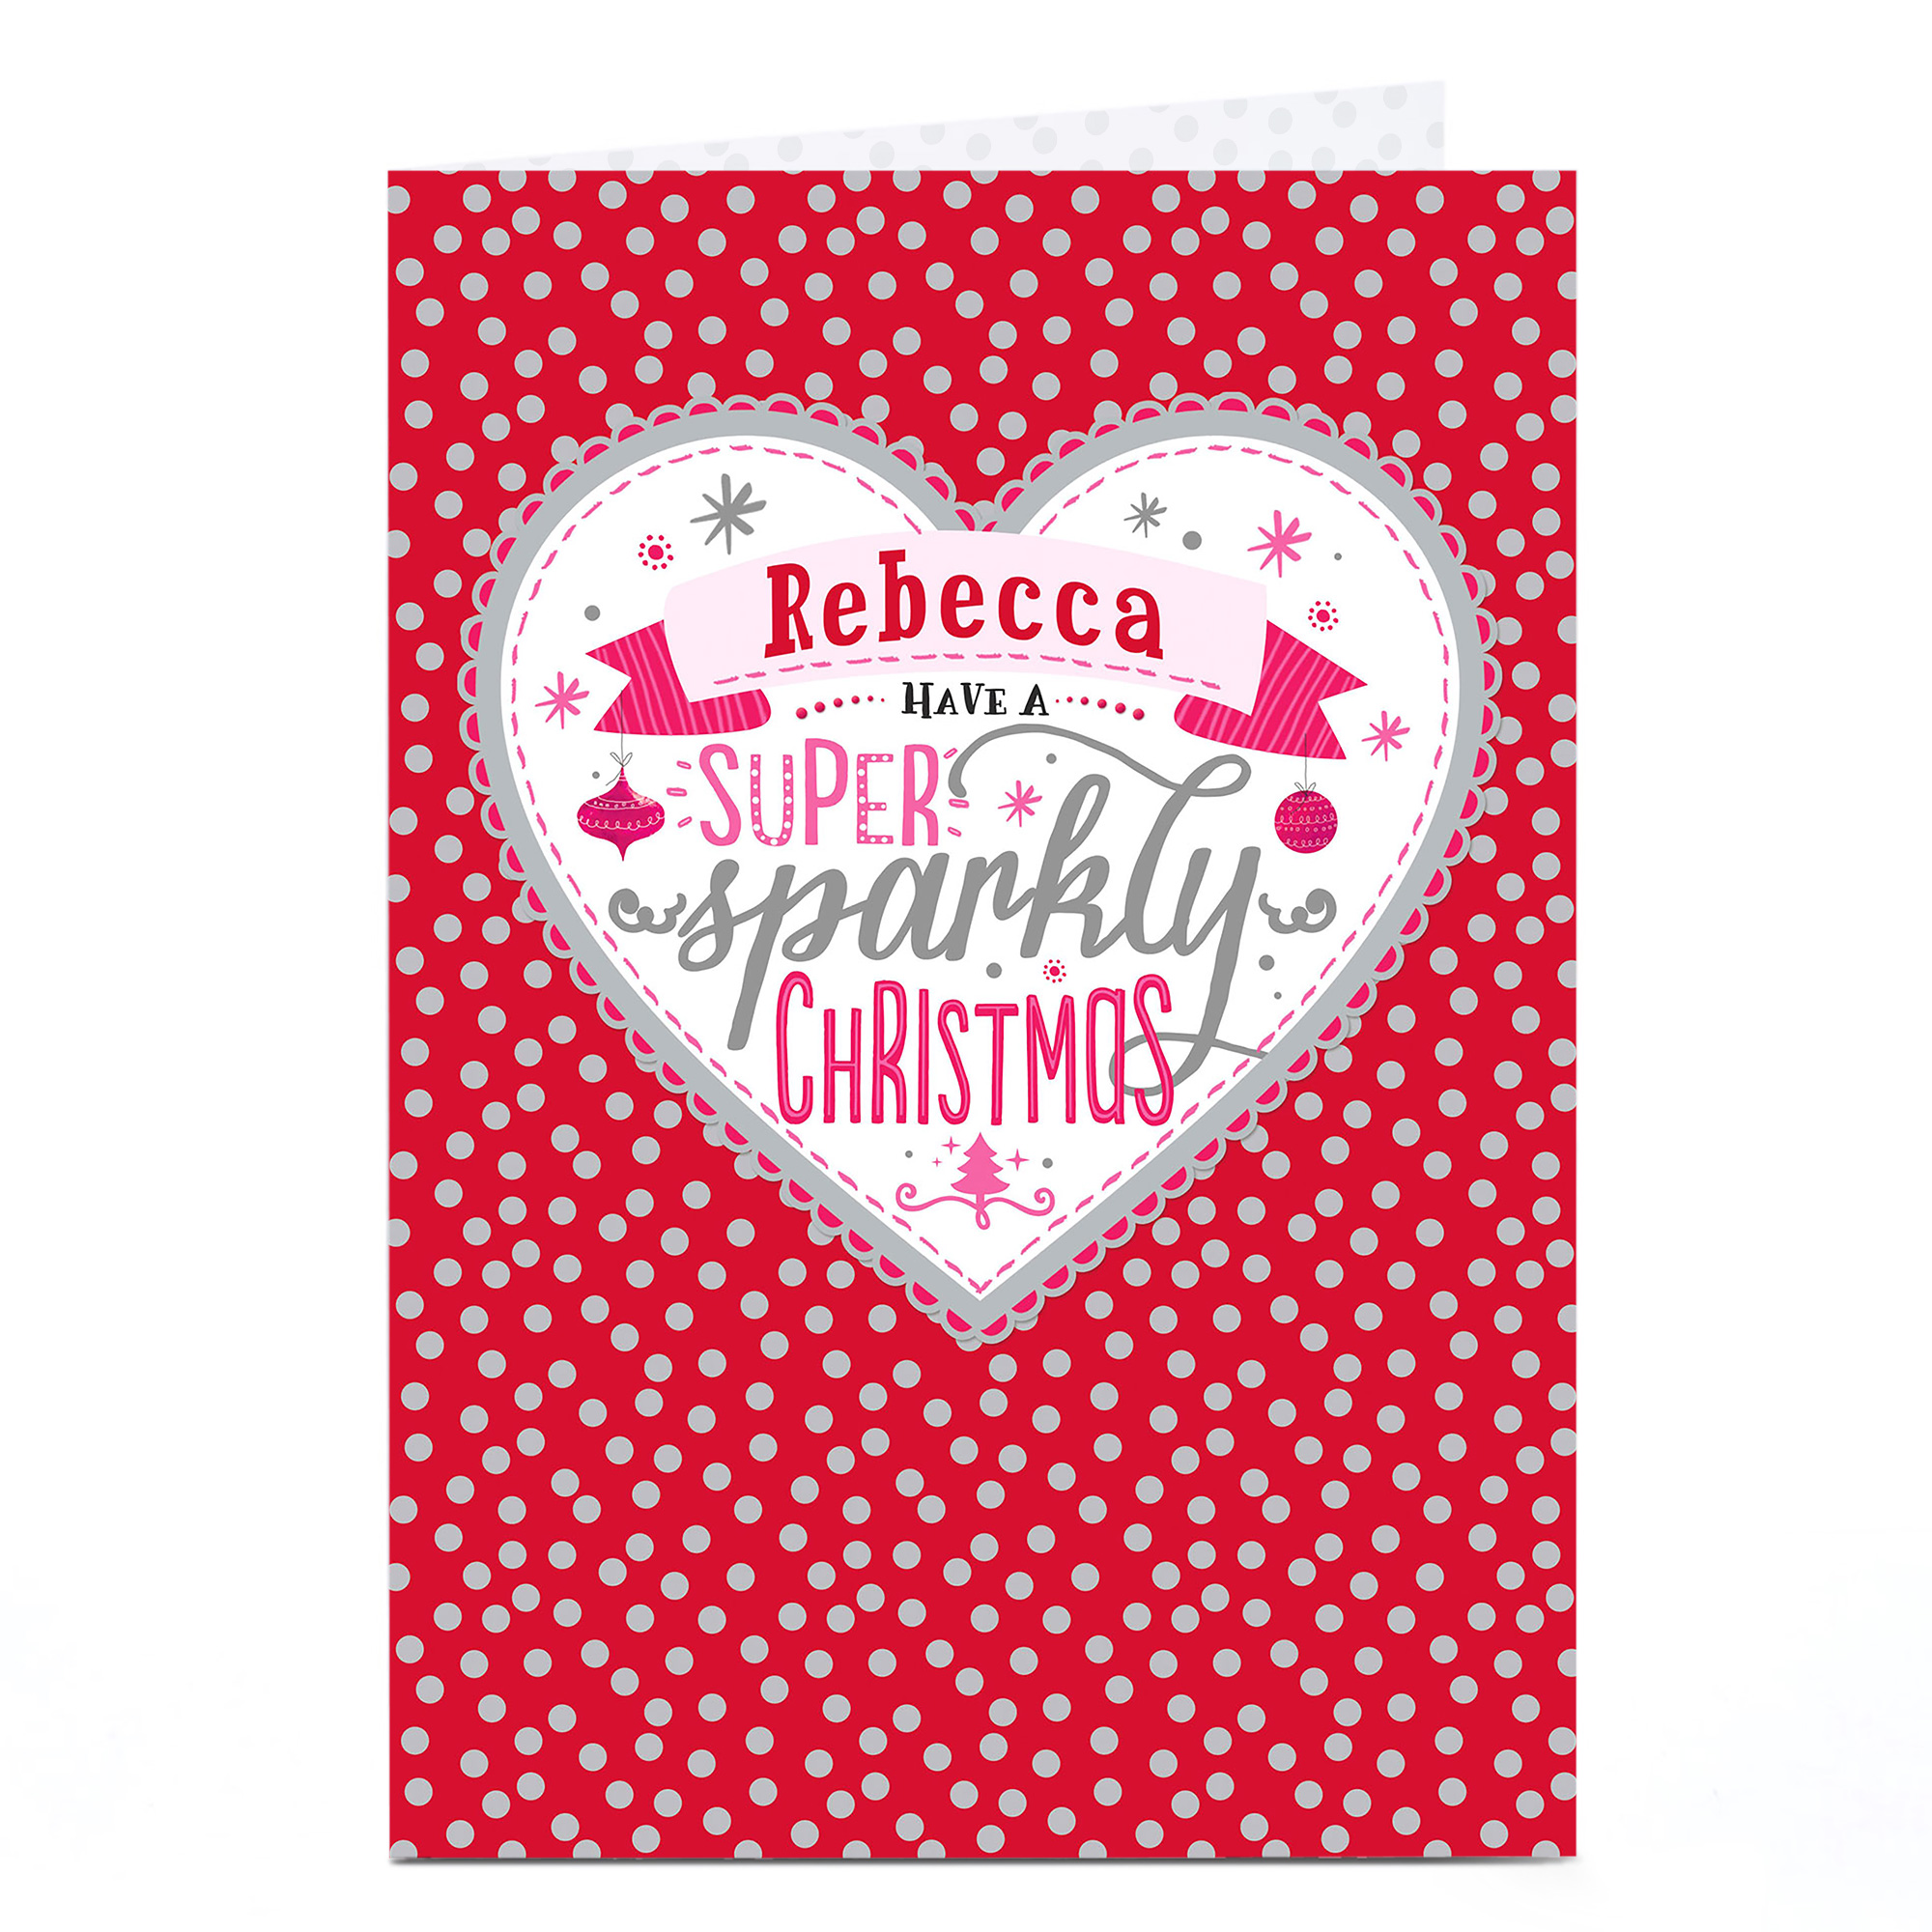 Personalised Christmas Card - Super Sparkly